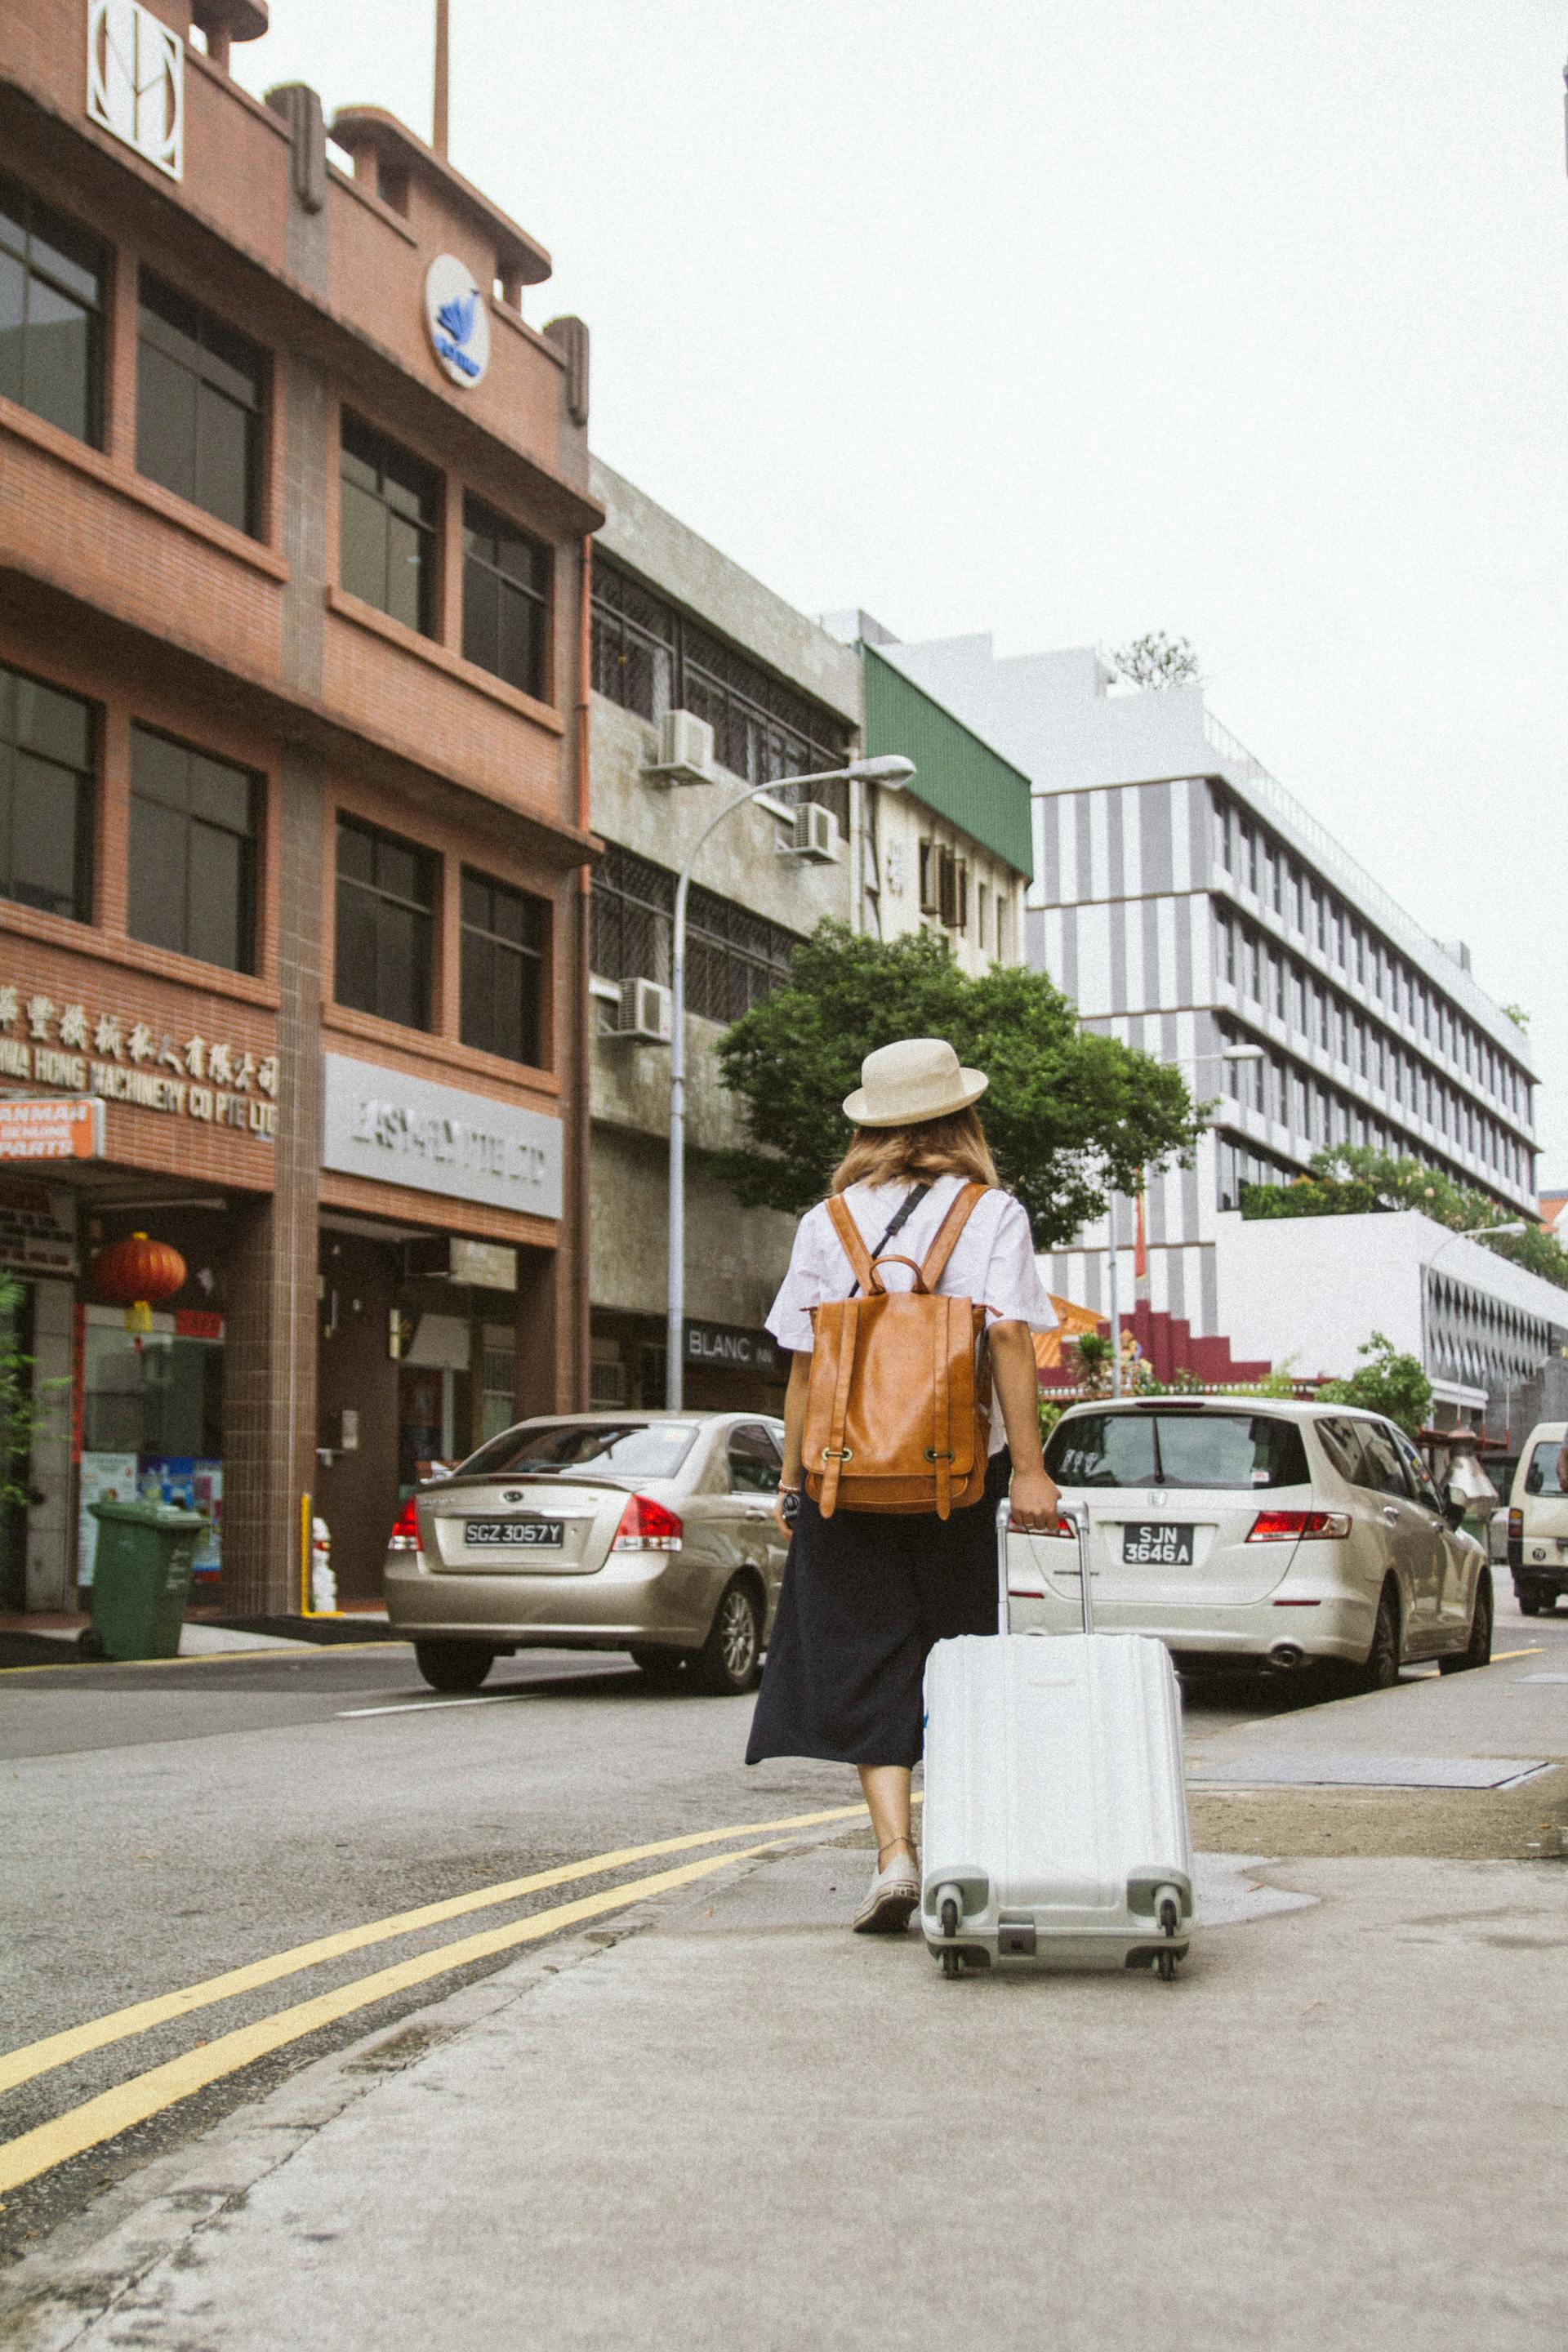 A woman walking away with her suitcase | Source: Pexels